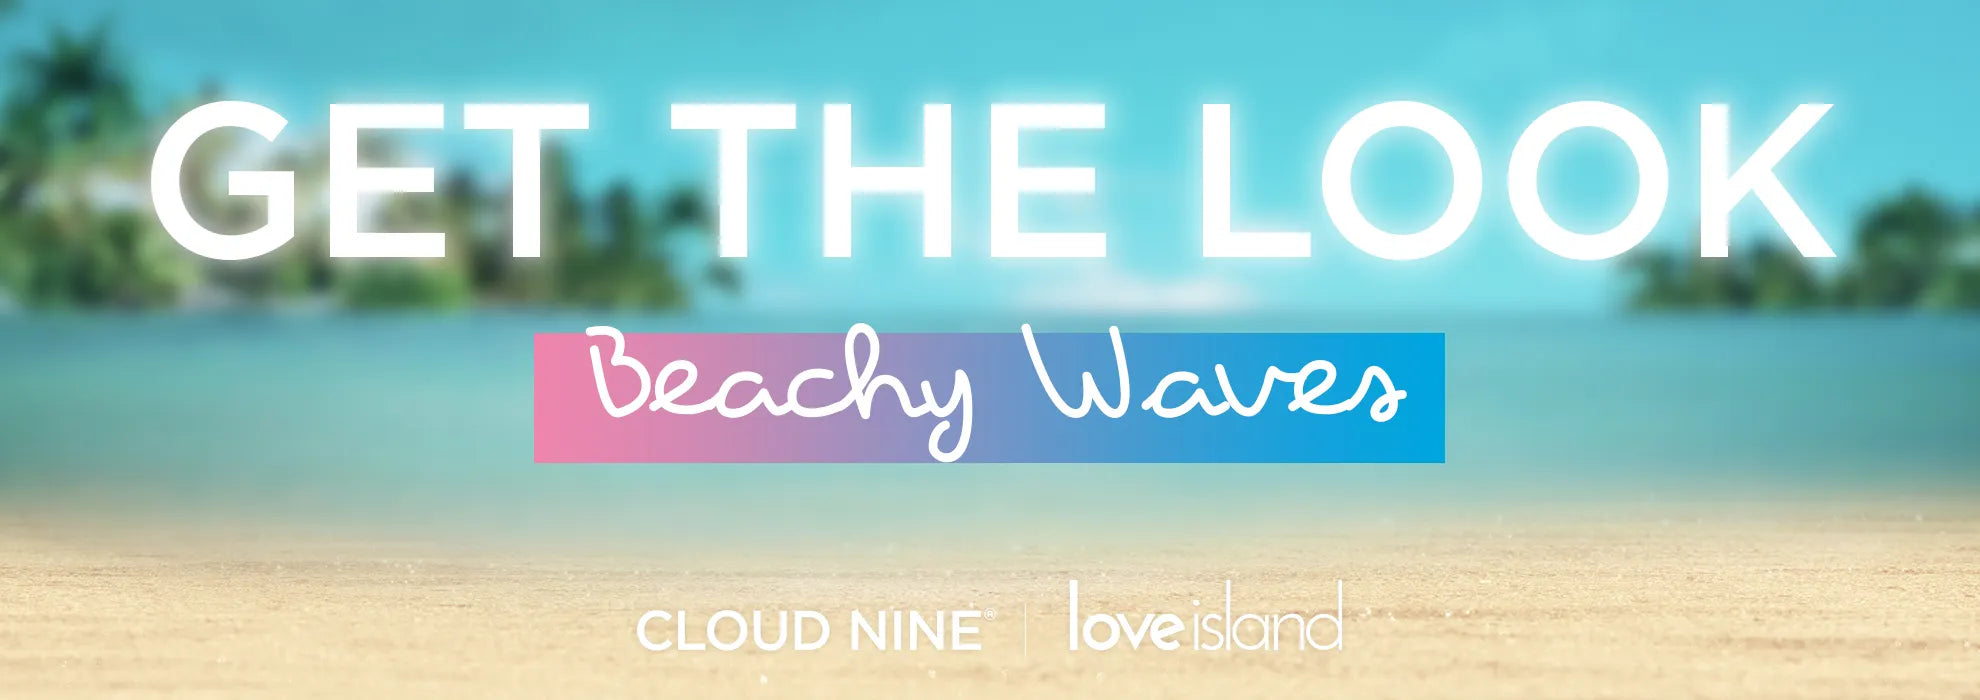 Beach background with text 'Get the look: Beachy waves'.